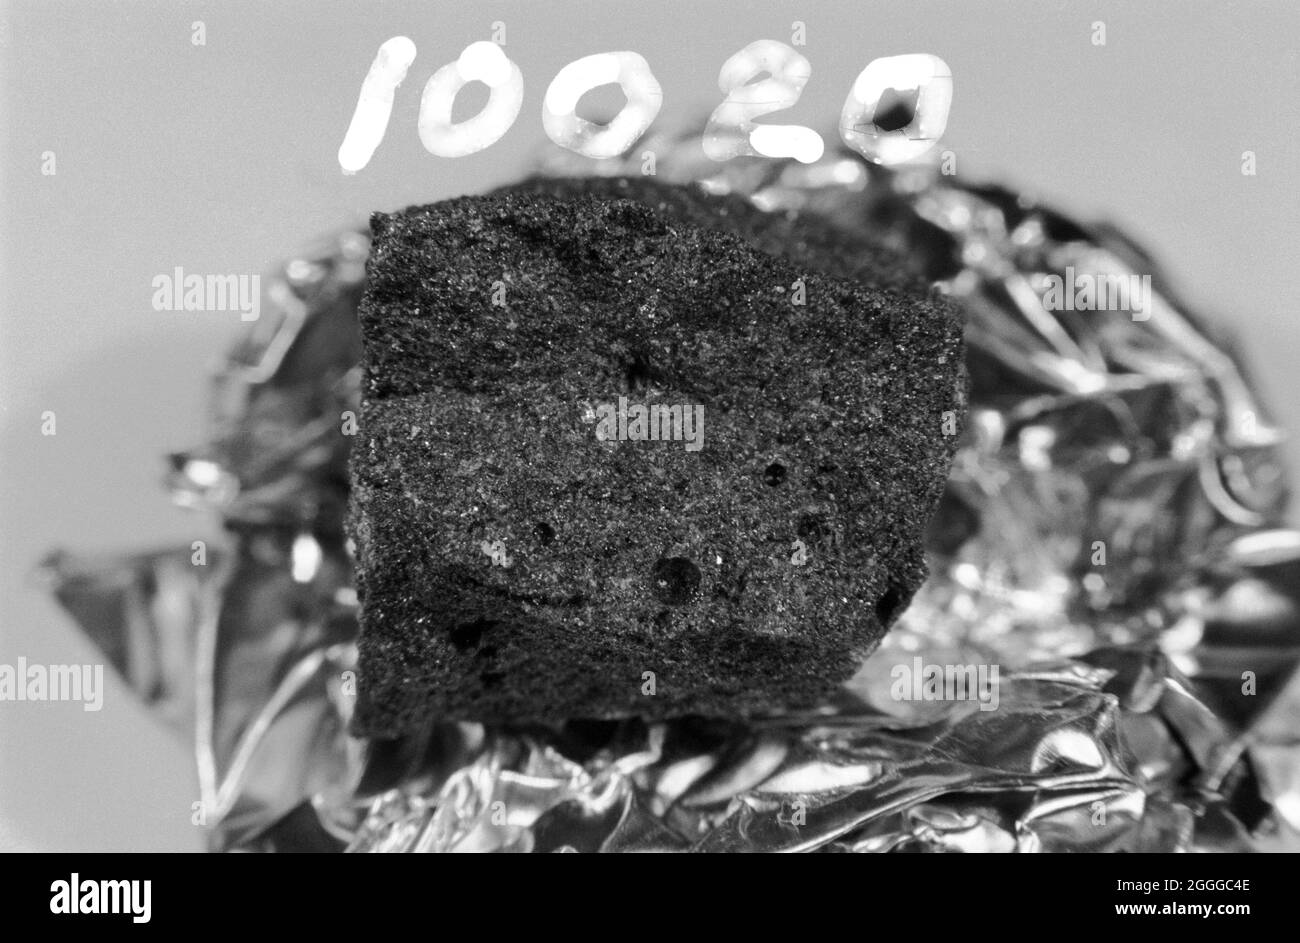 Lunar sample #10020, collected on July 20, 1969, by Commander Neil Armstrong and lunar module pilot Buzz Aldrin during the Apollo 11 mission. Stock Photo